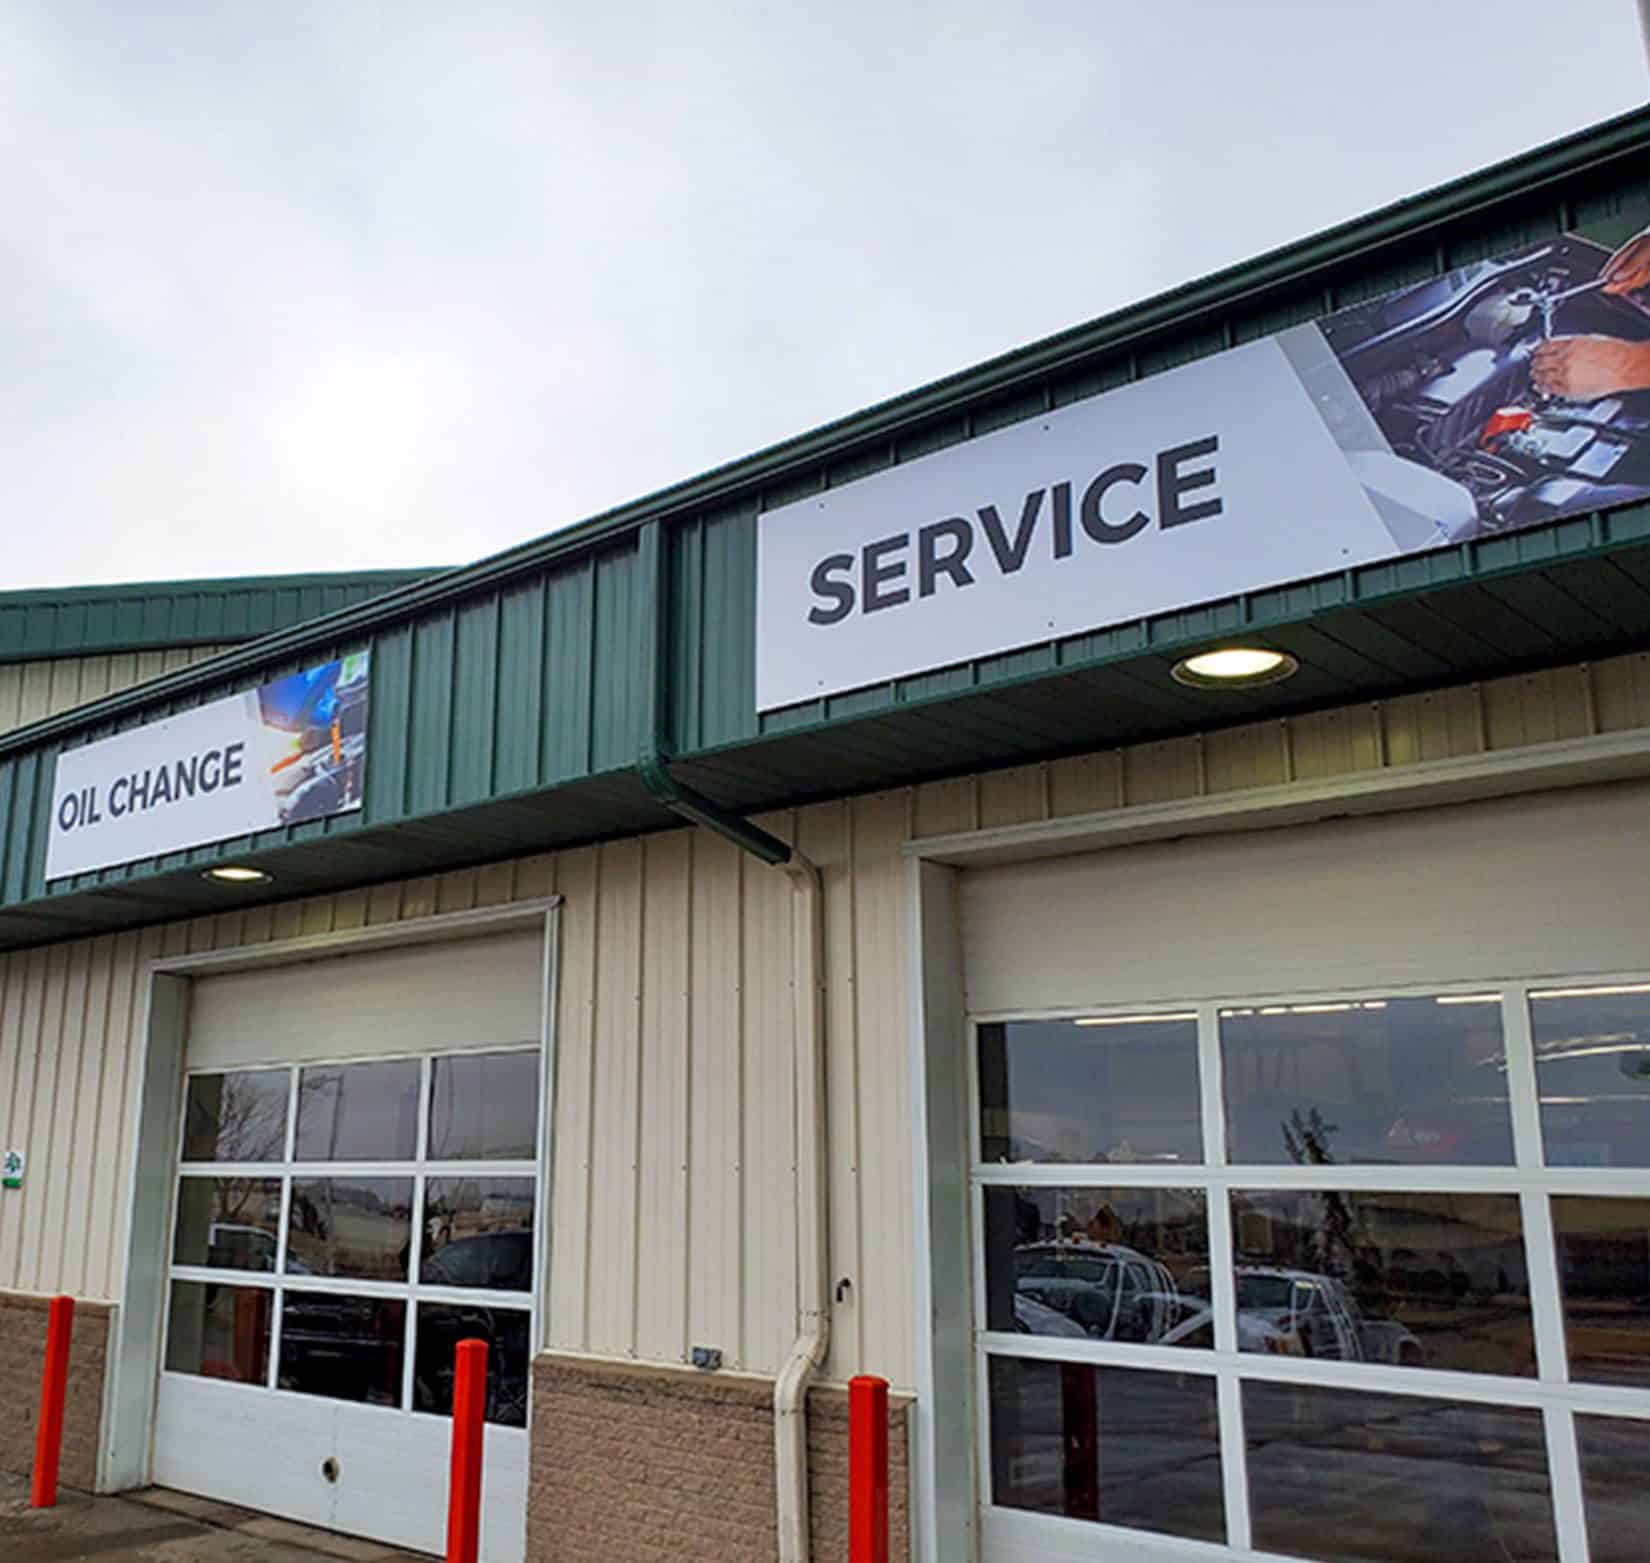 Large exterior signs for auto repair shop